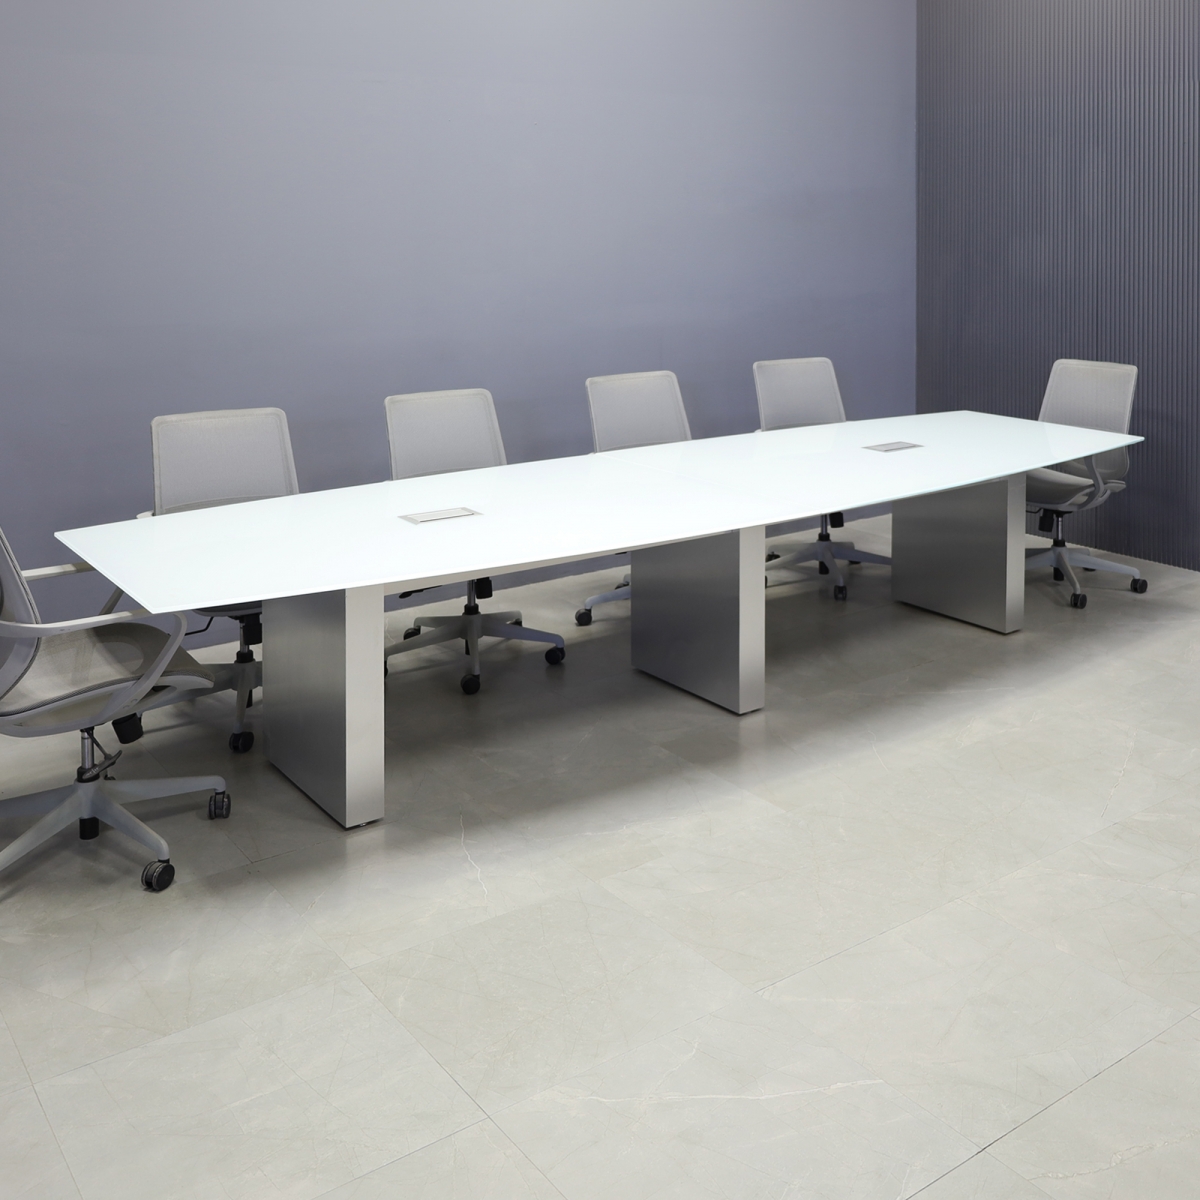 Omaha Boat Shape Conference Table in White Tempered Glass - 144 In. - Stock #37